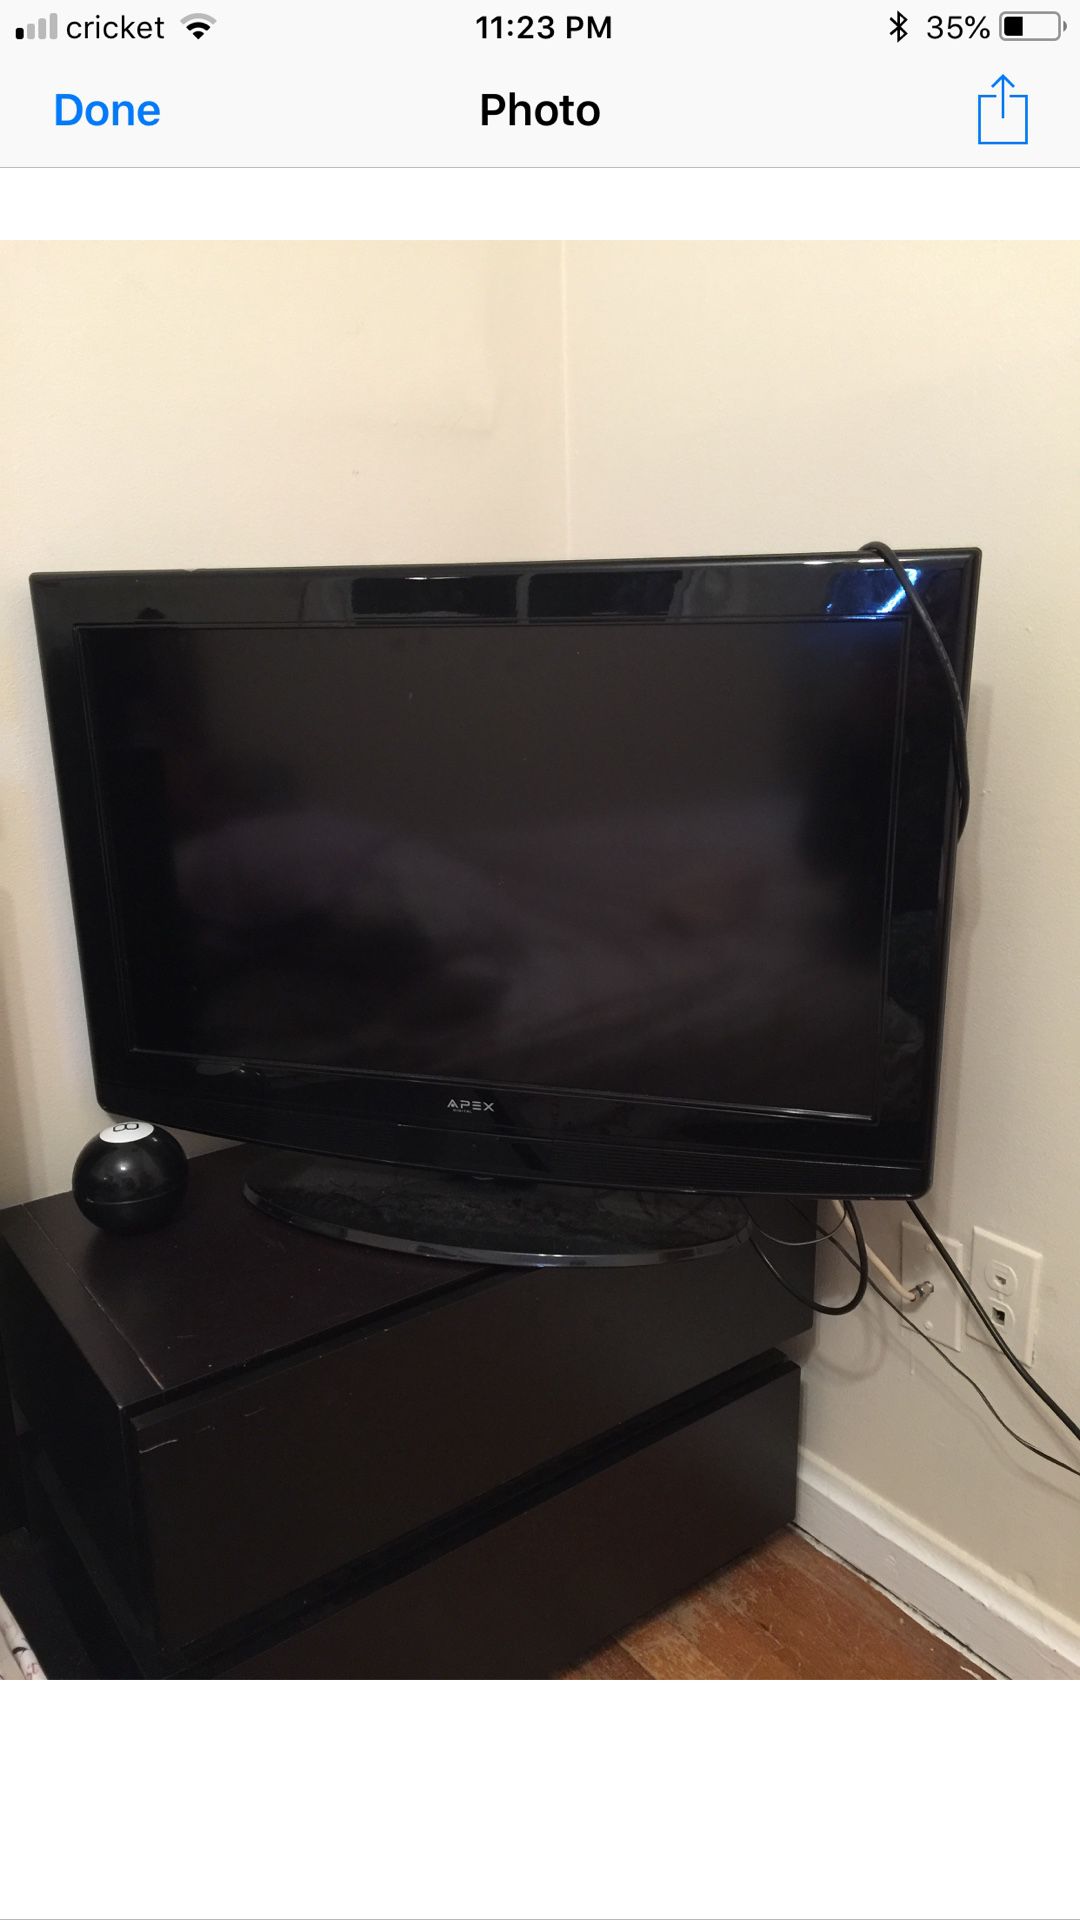 Smart TV 36 inch selling cheap because I am moving